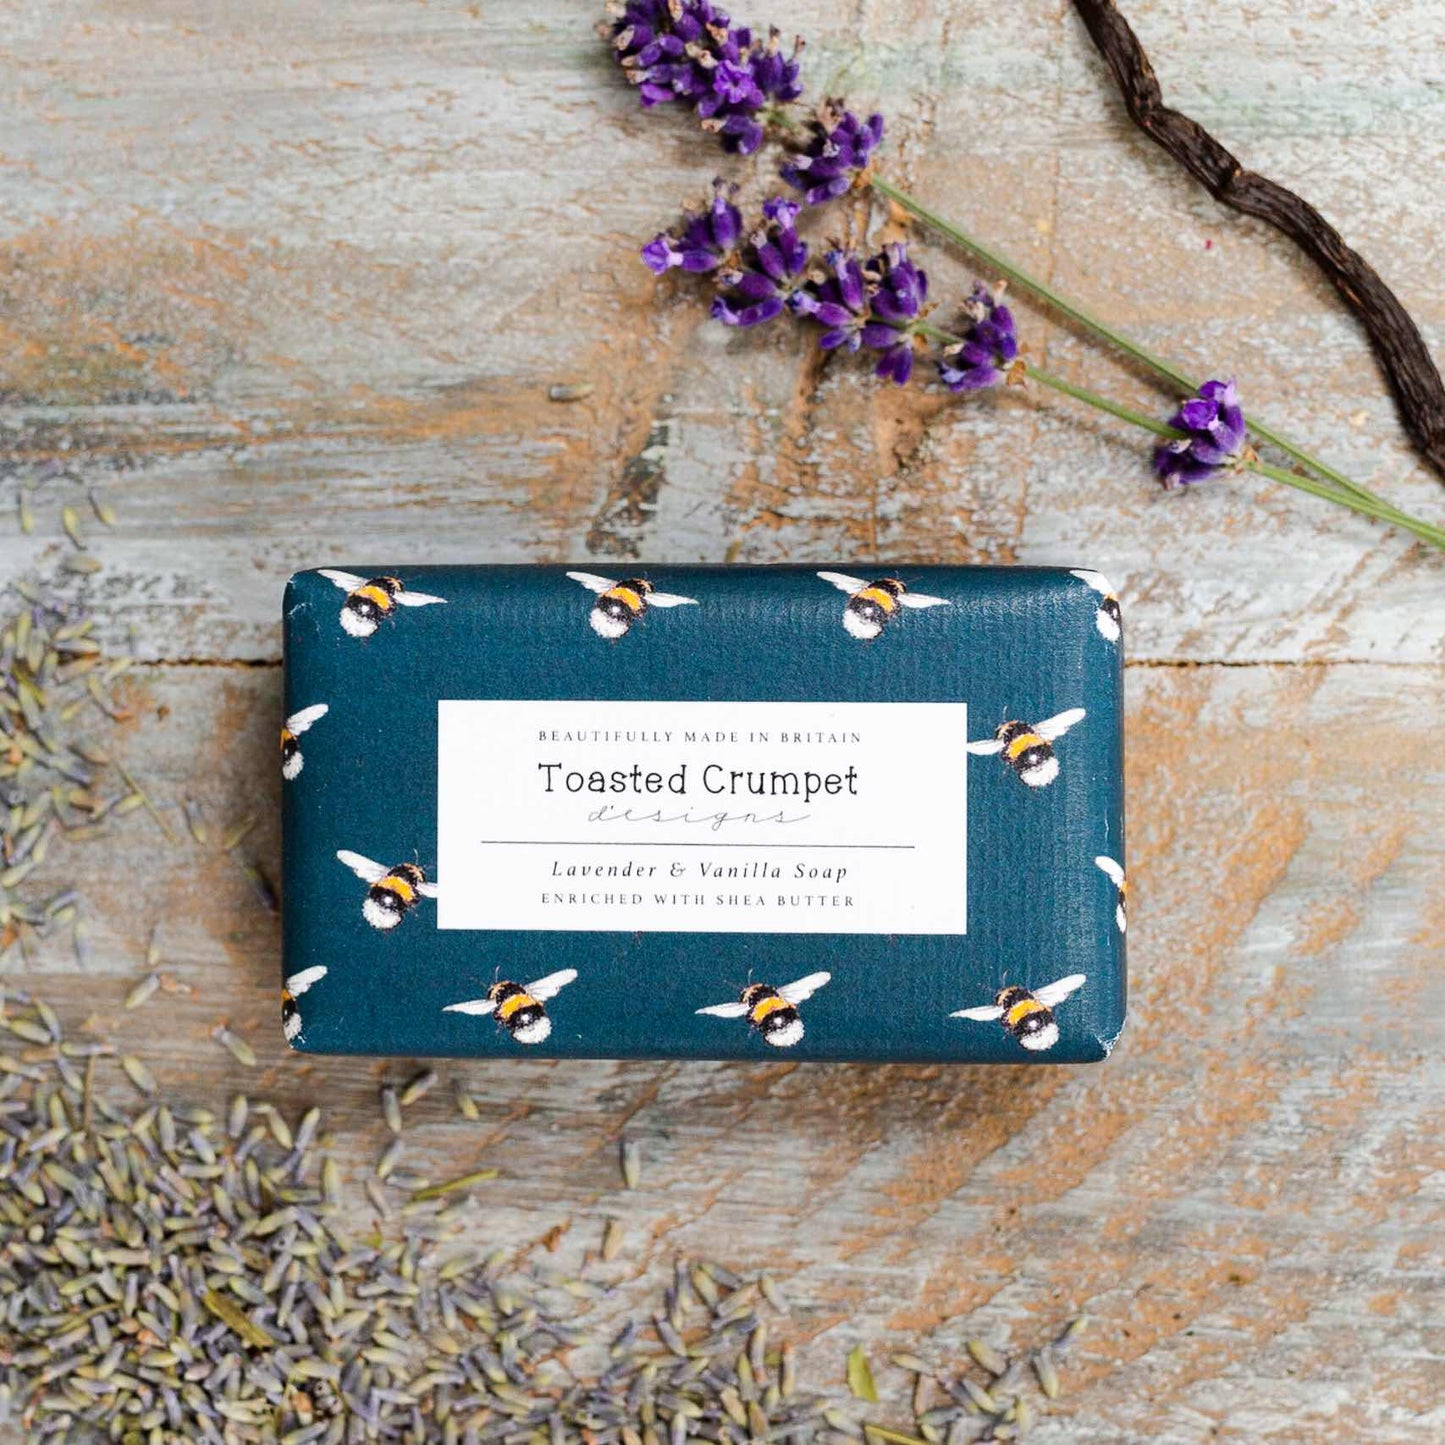 Rectangular soap wrapped in bee-patterned packaging with a label by Toasted Crumpet.  Photographed against a wooden surface with some lavender in the corner.